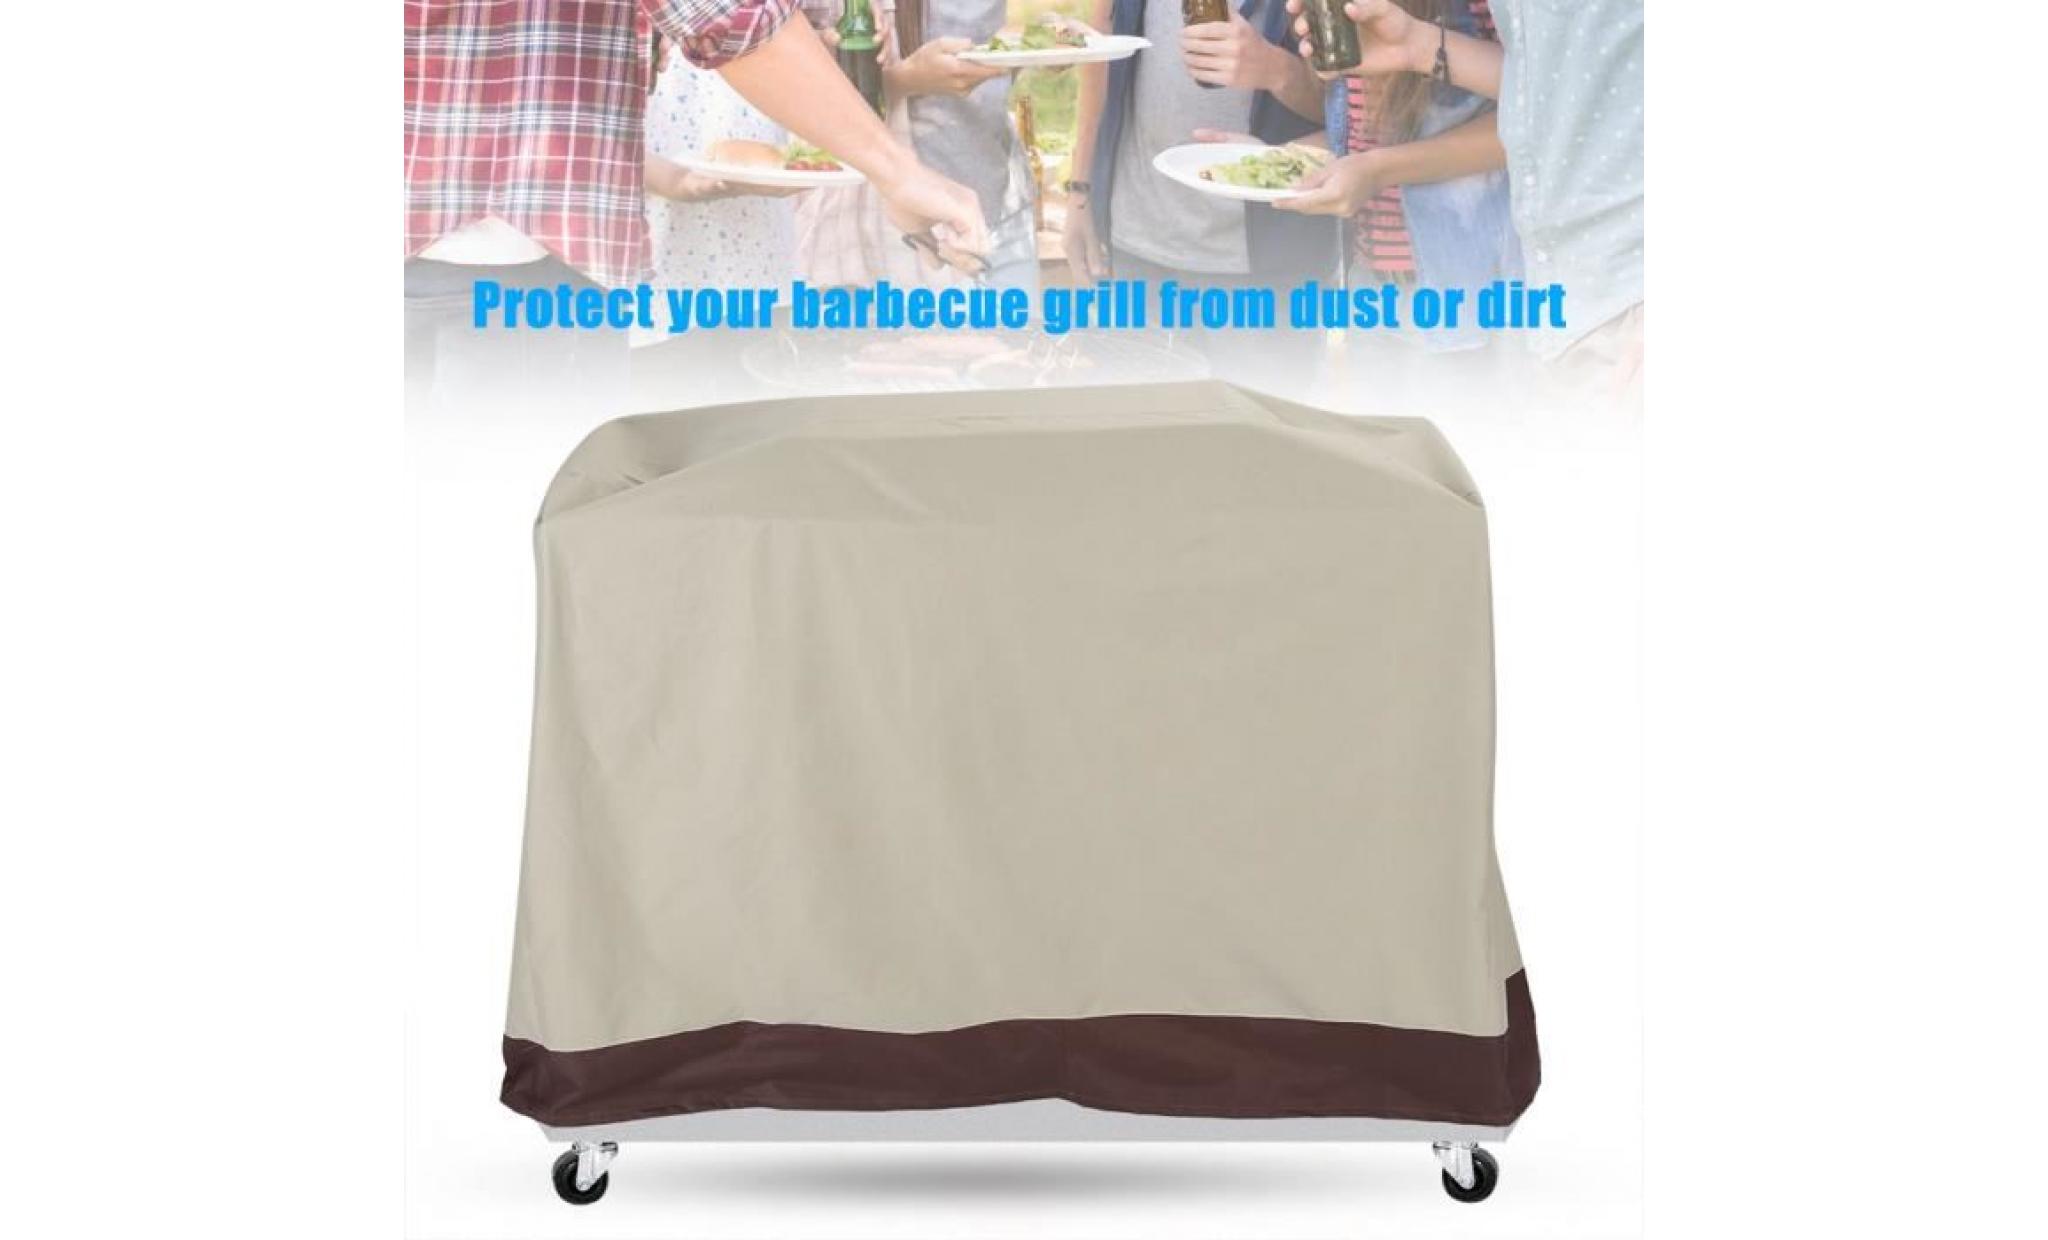 housse barbecue bbq couvercle barbecue protection 162 * 61 * 117cm